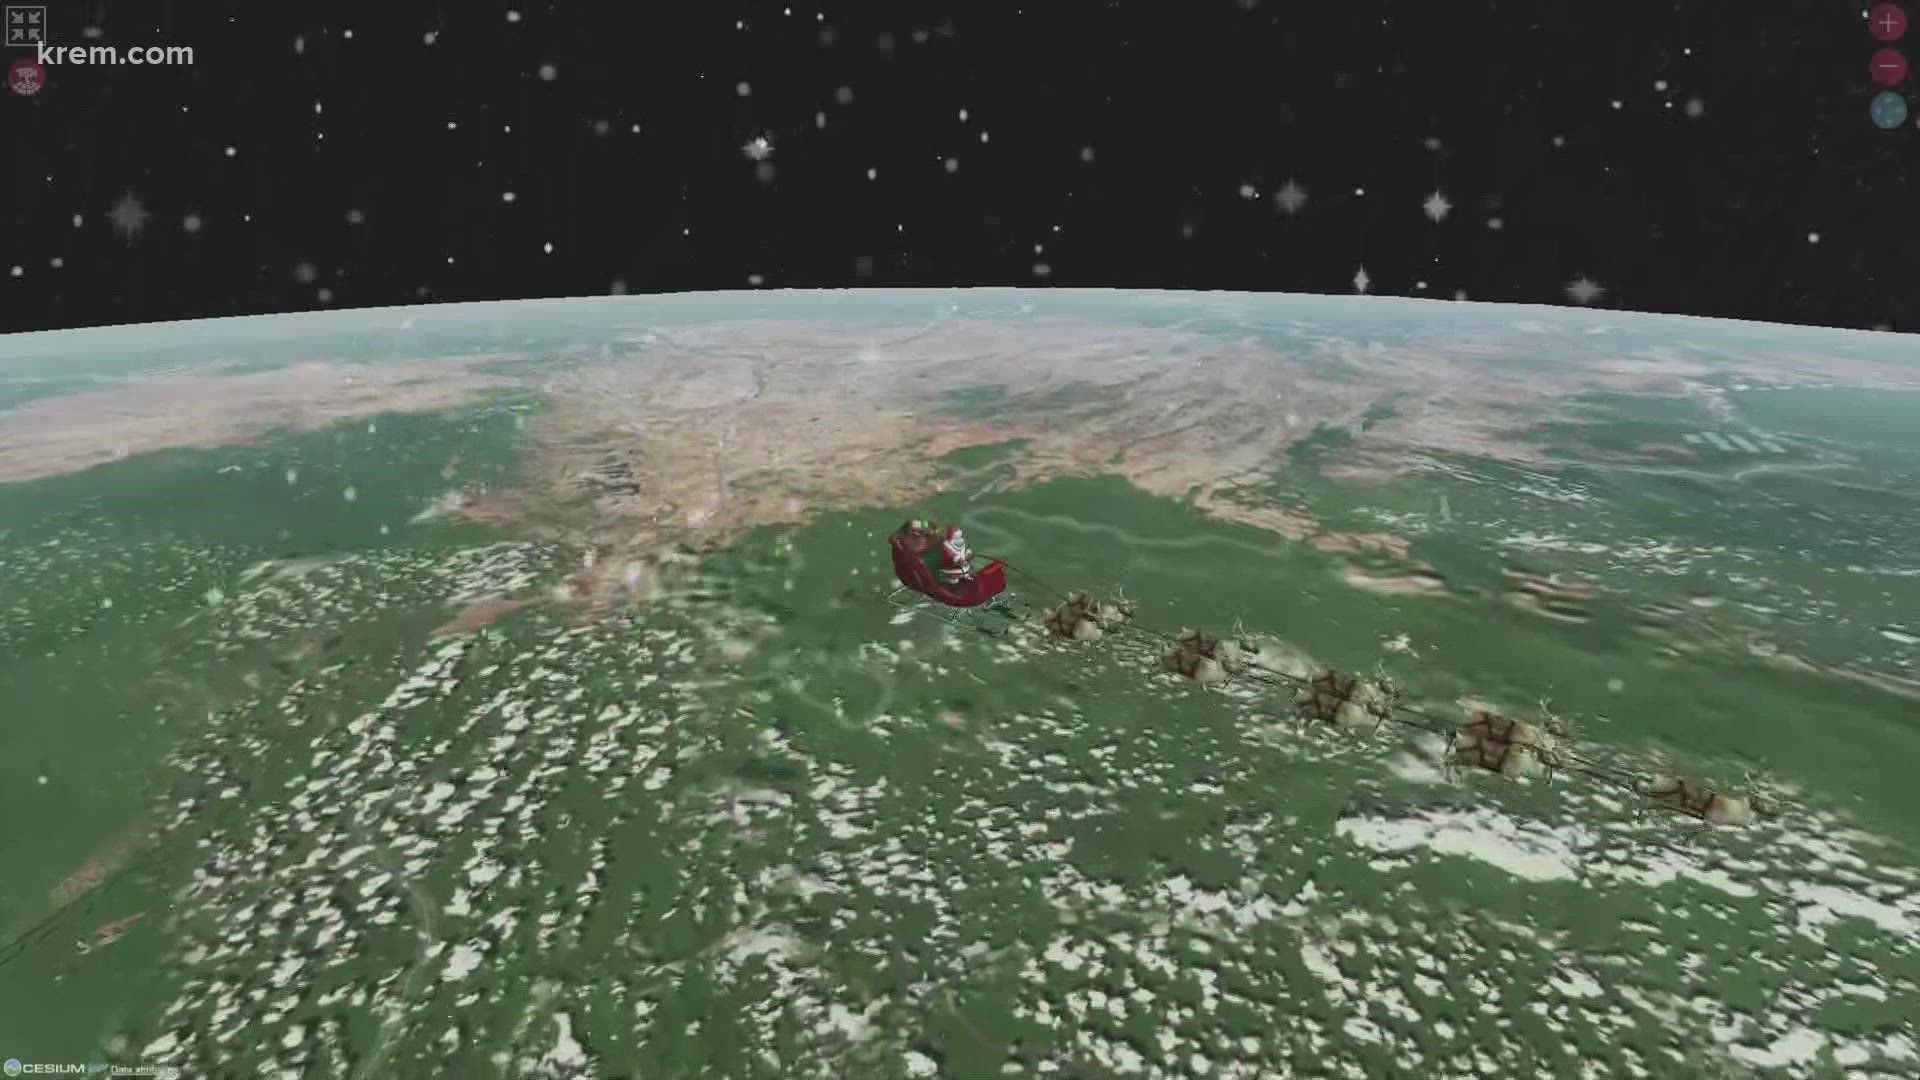 Santa Claus is coming to town. Just like the past 65 years, the North American Aerospace Defense Command is tracking Santa as he makes his way around the world.